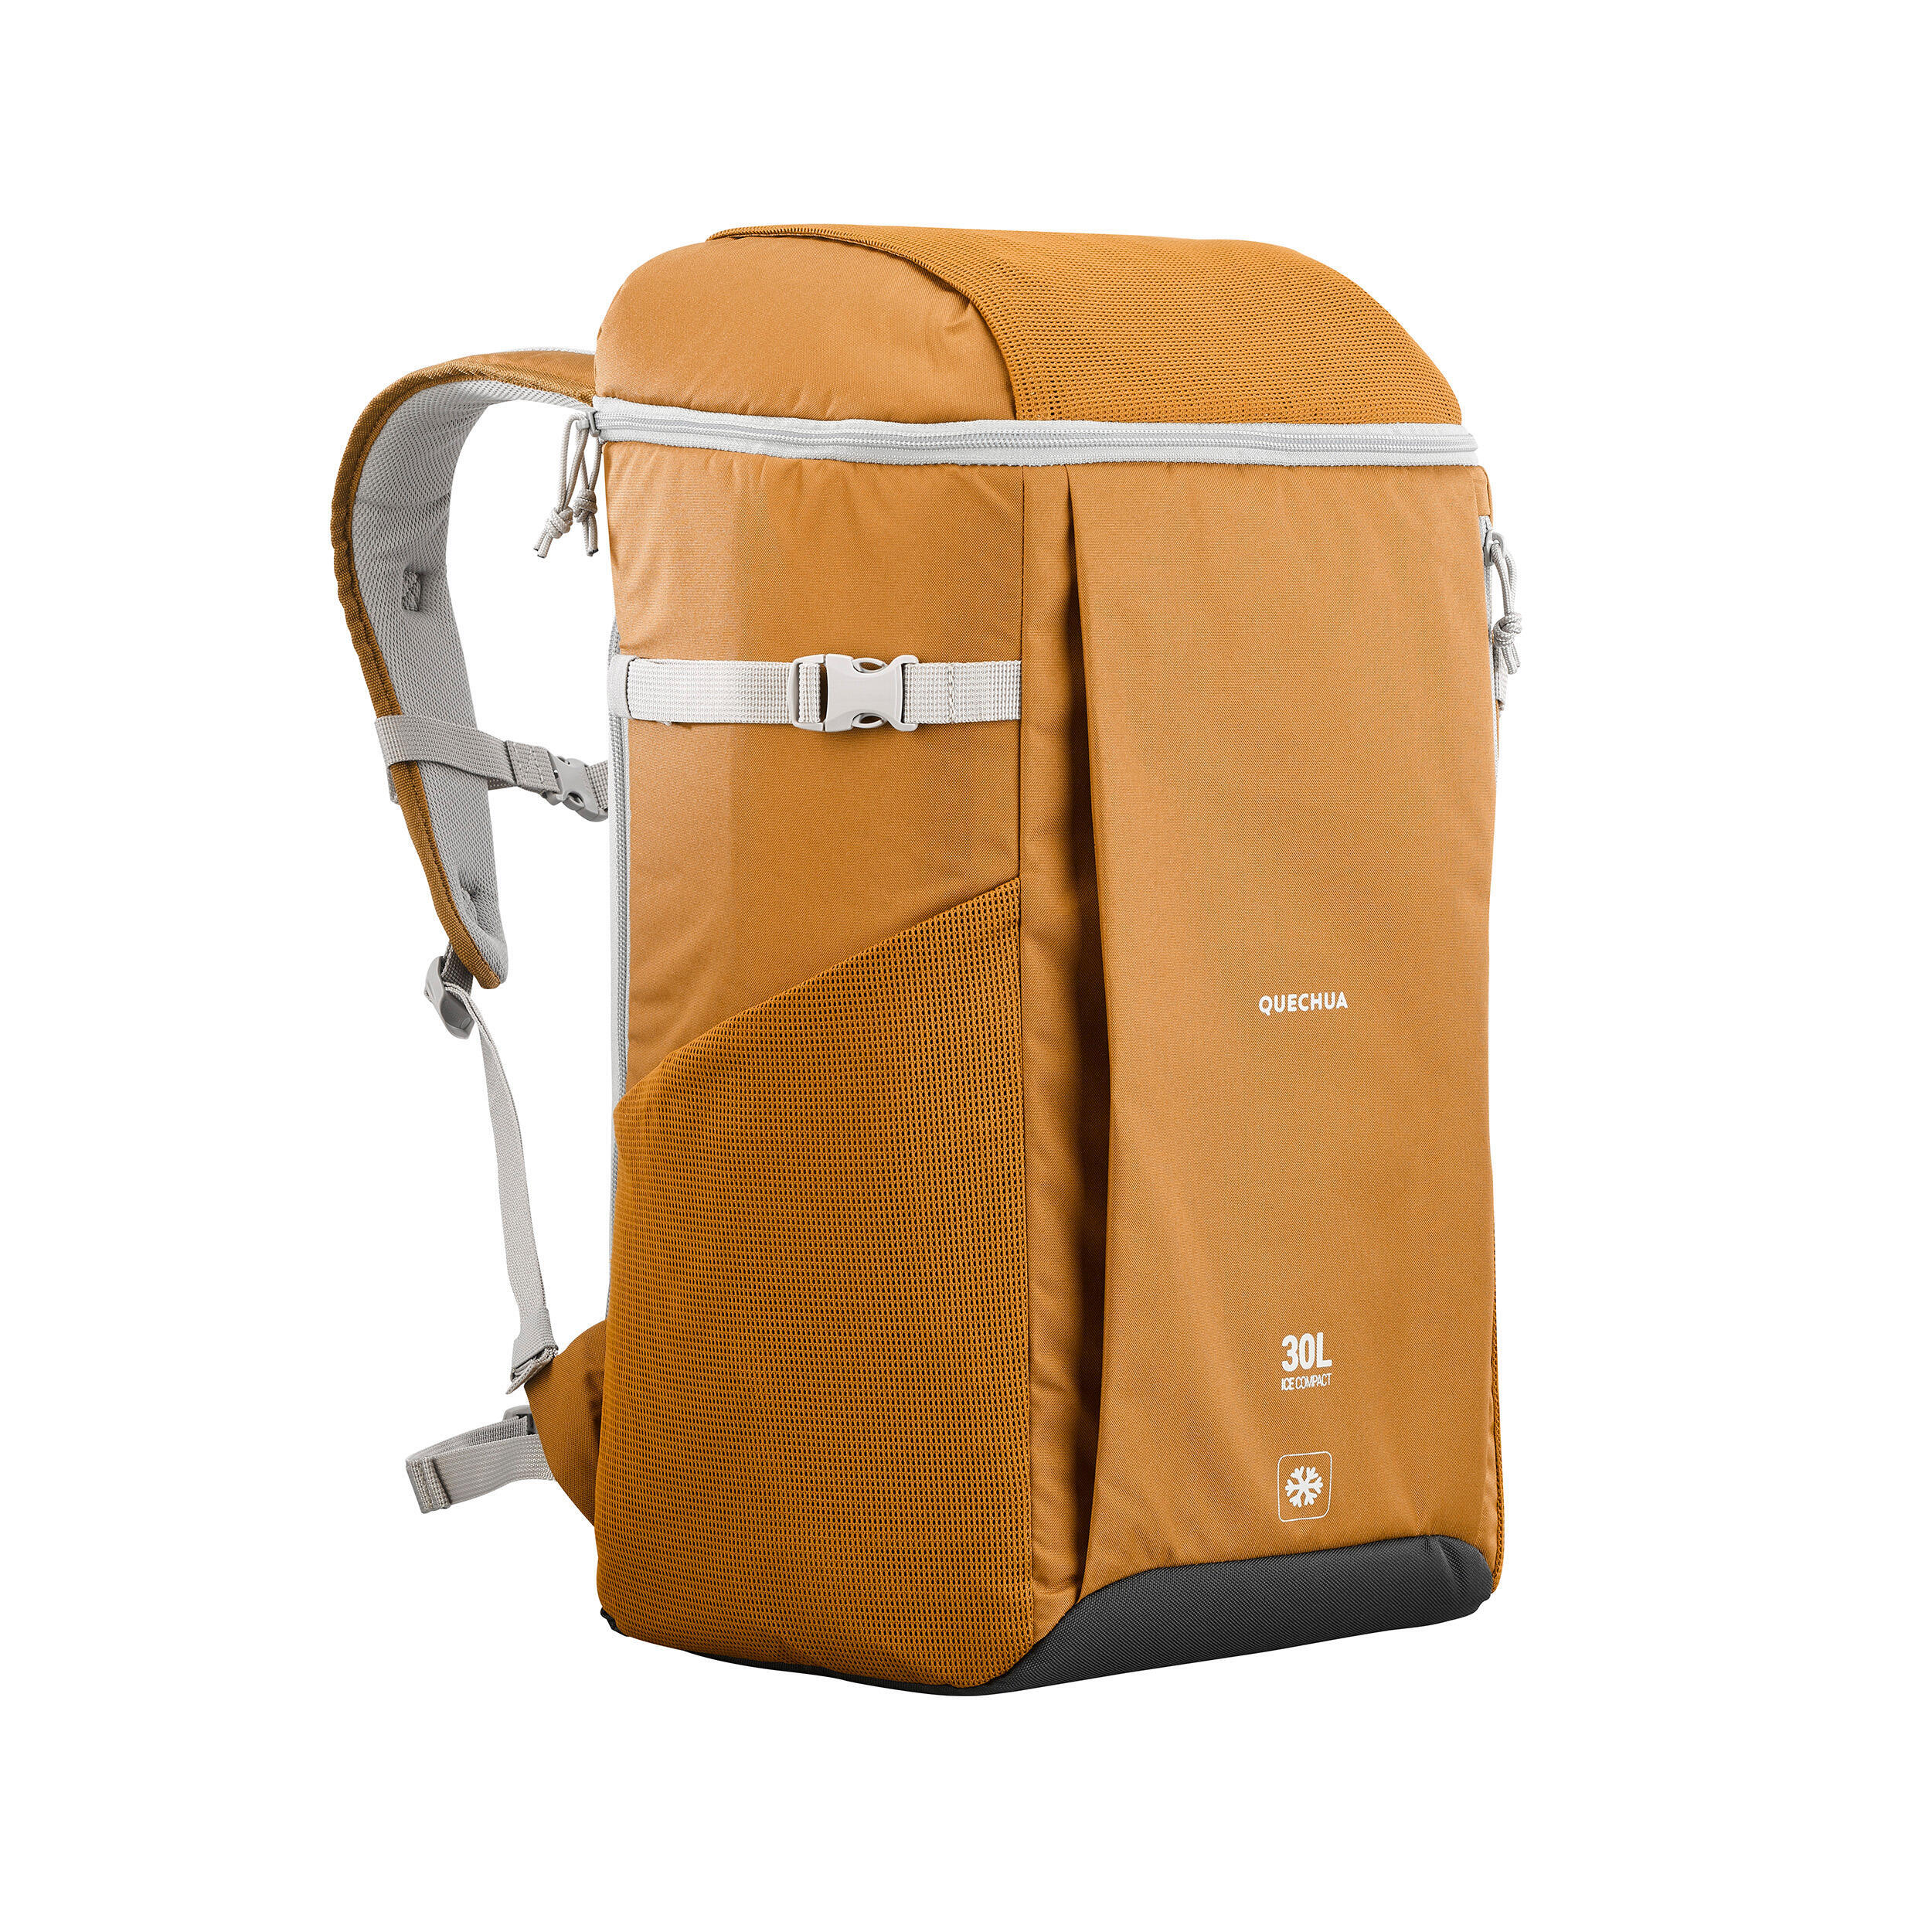 Isothermal backpack 30L - NH Ice compact 100 QUECHUA